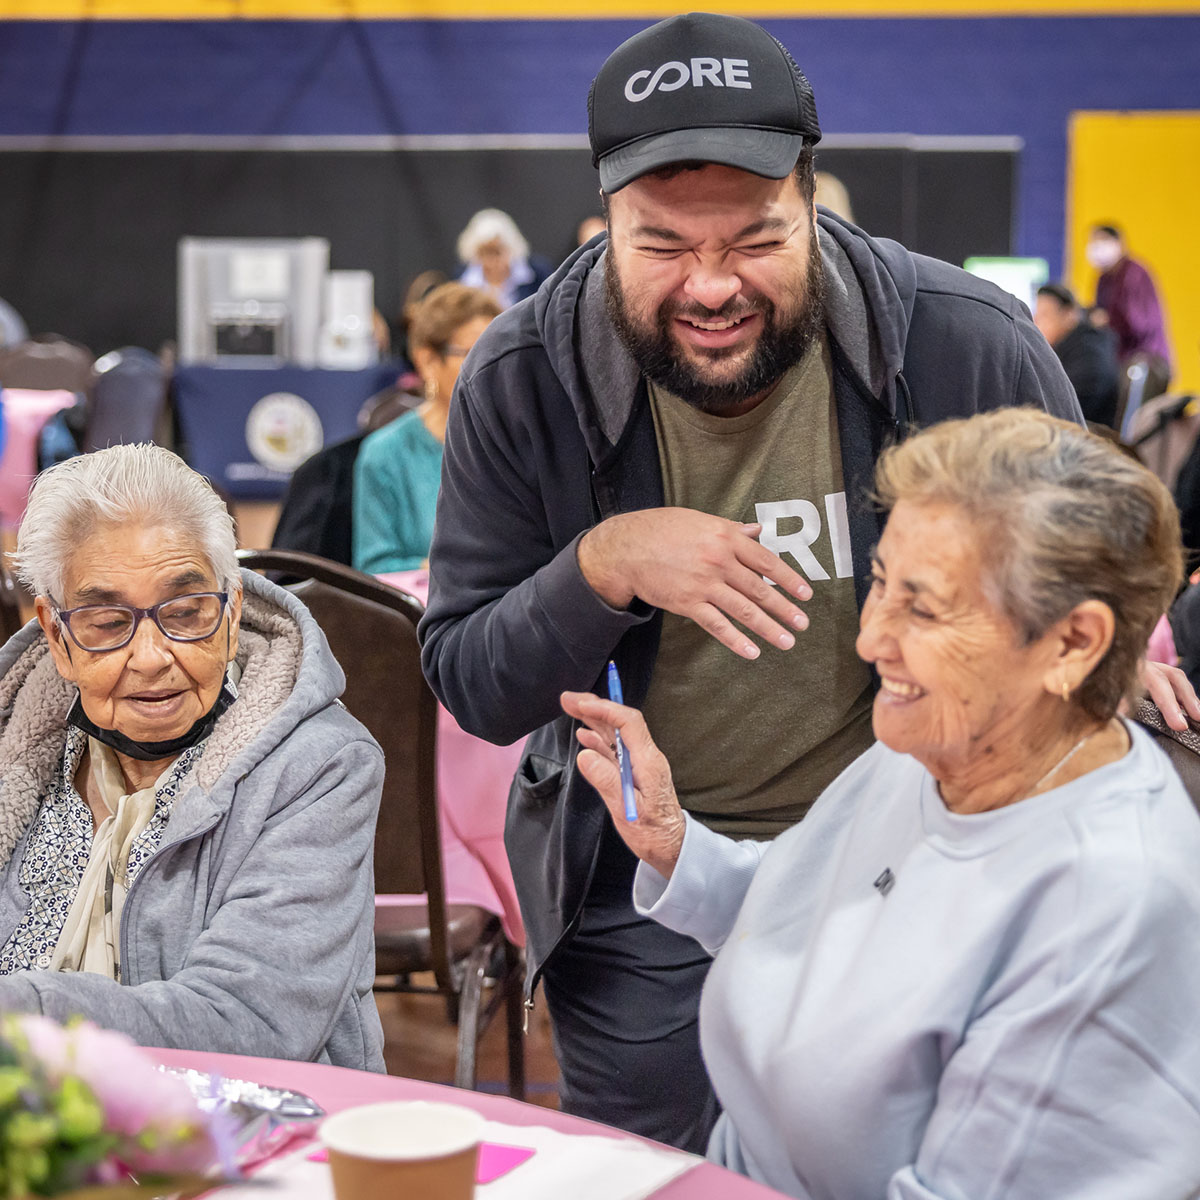 A male CORE staffer laughs with two elderly women at a table during a community health event.